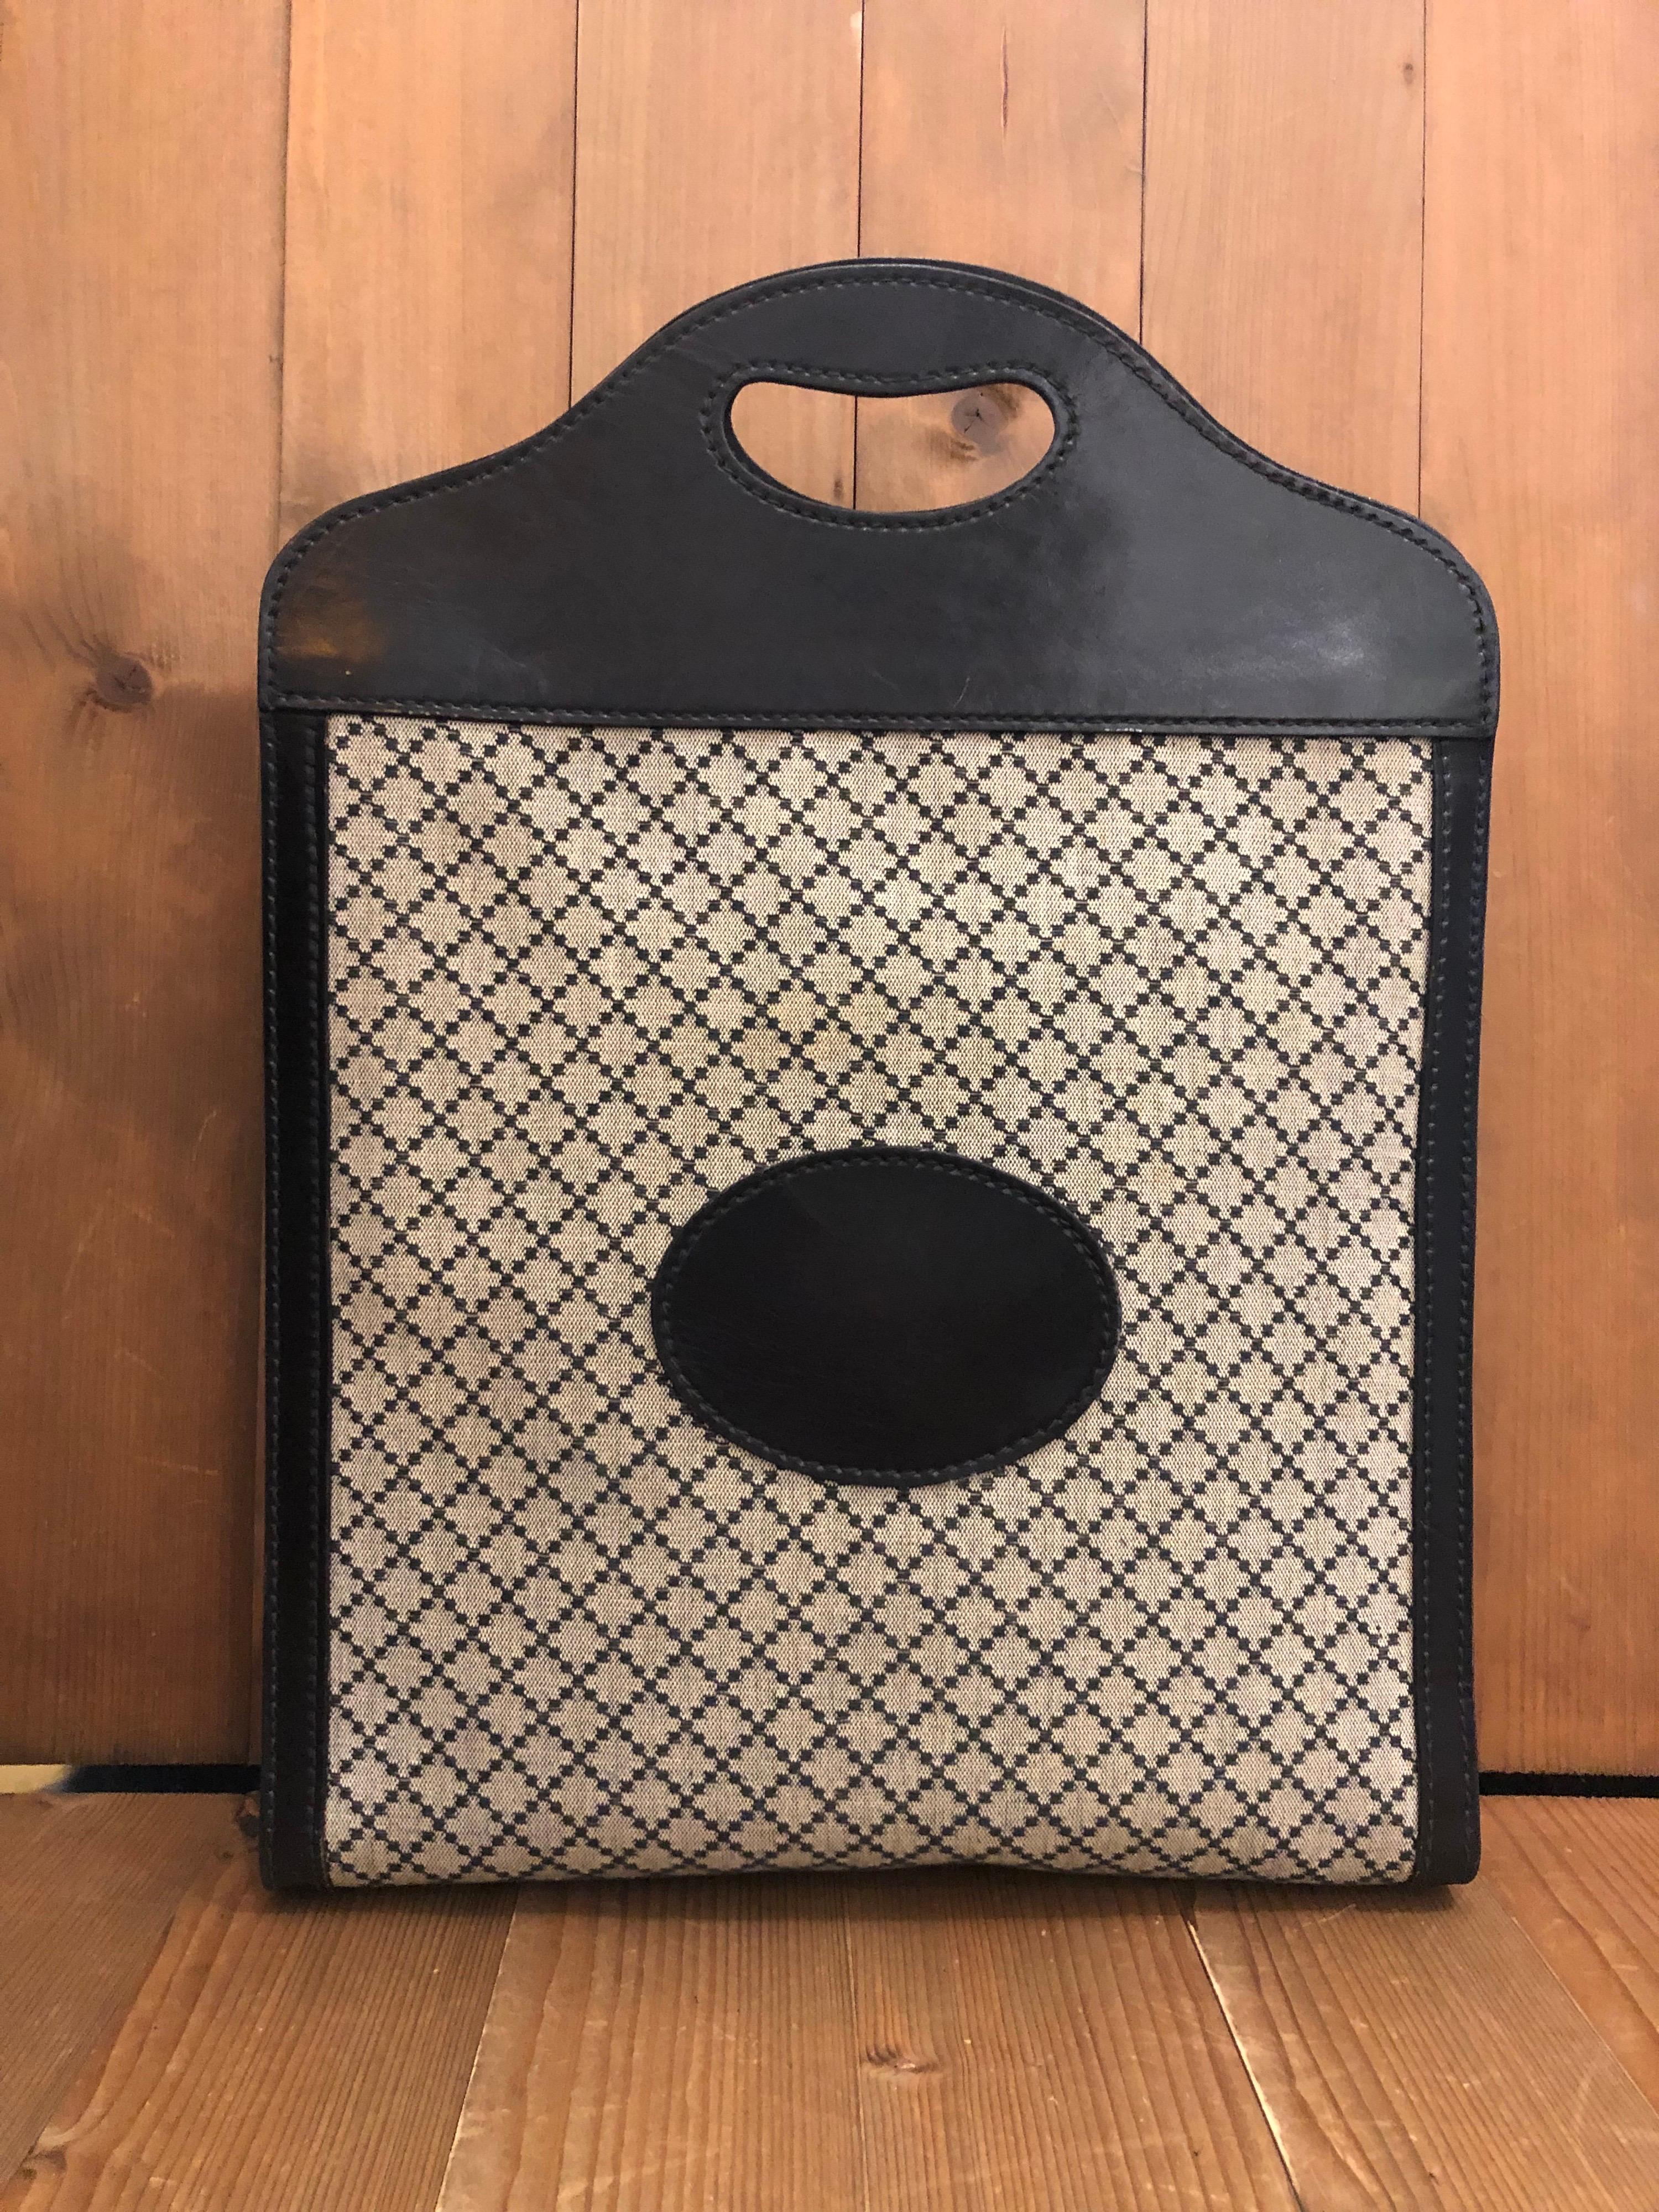 1970s Gucci book tote in Gucci iconic black diamanté jacquard and leather. Made in Italy. Measures approximately 13.5 x 18 x 2.75 inches 

Condition: Minor signs of wear. Generally in good condition 

Outside: Minor marks on jacquard and leather